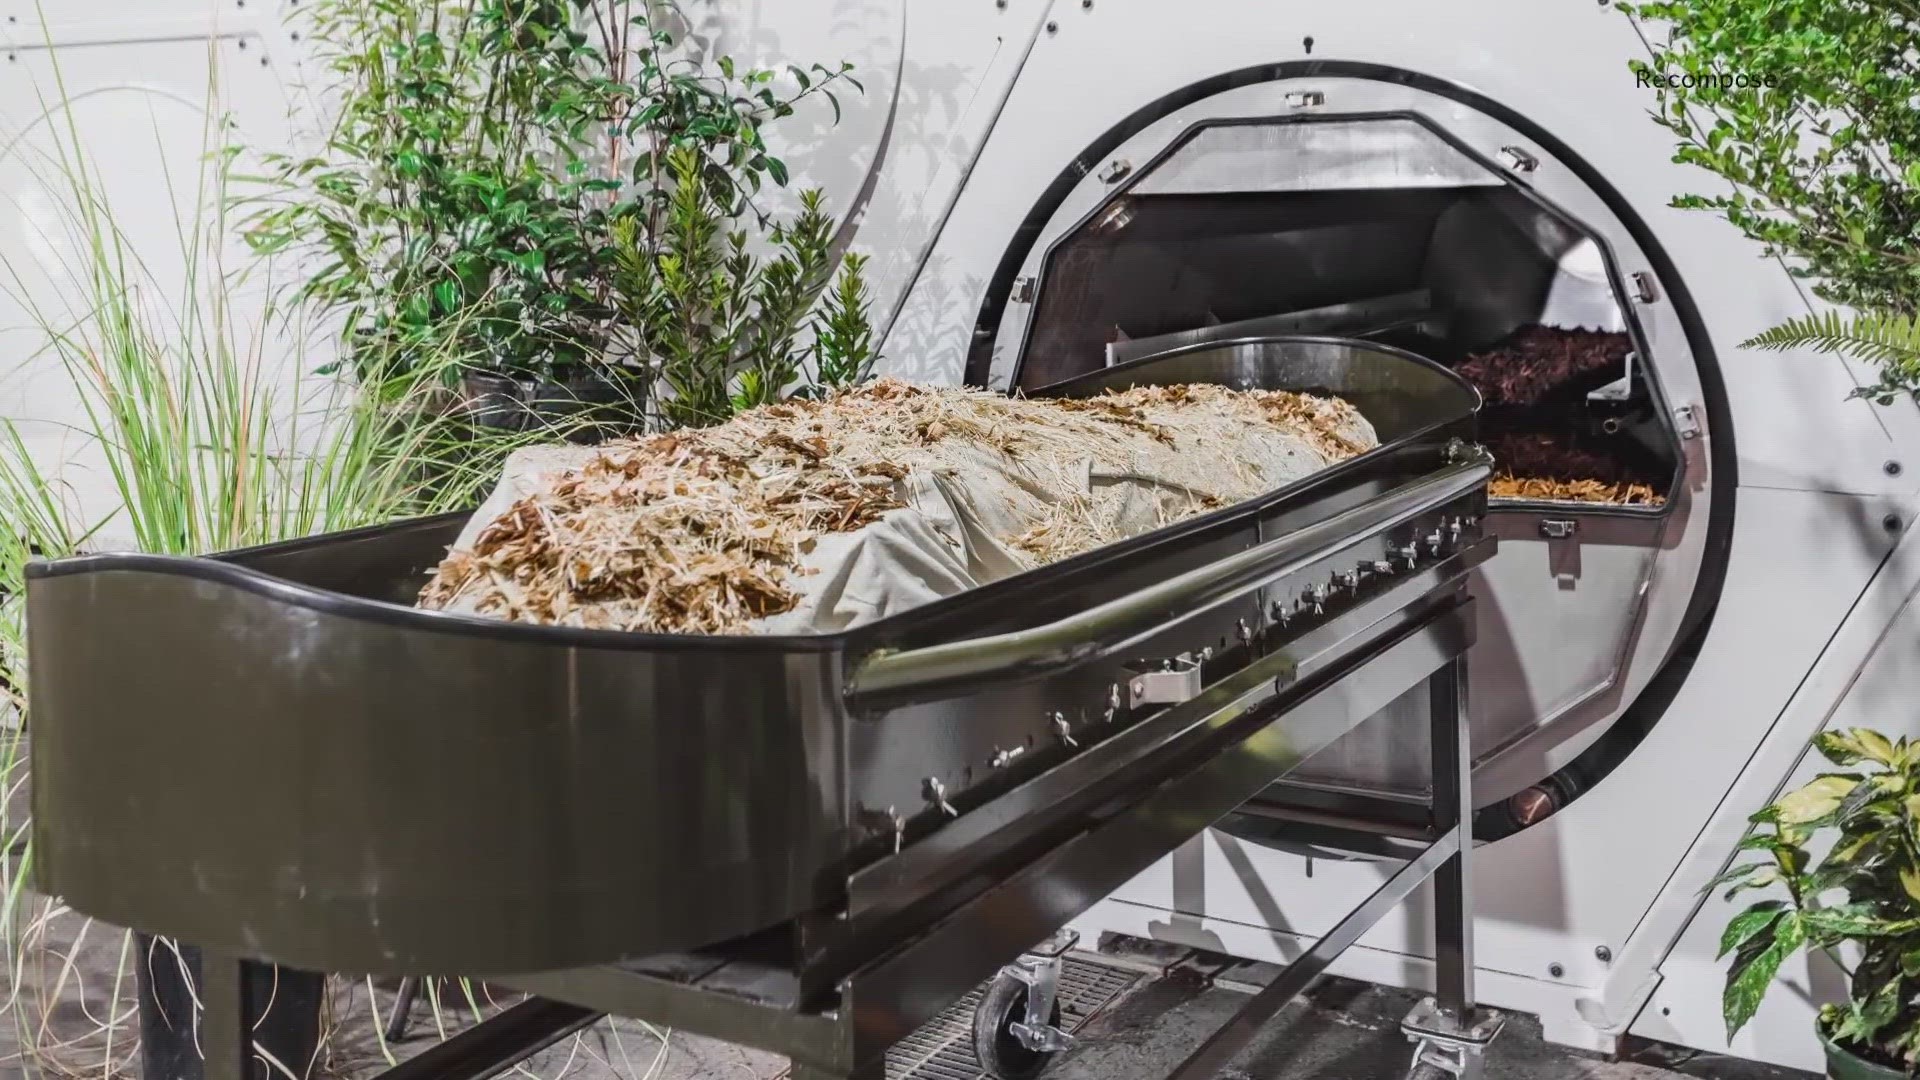 HB 2081 would add ‘human composting’ to the state’s funeral services allowed. The process is less expensive than funeral services and about the same as cremation.